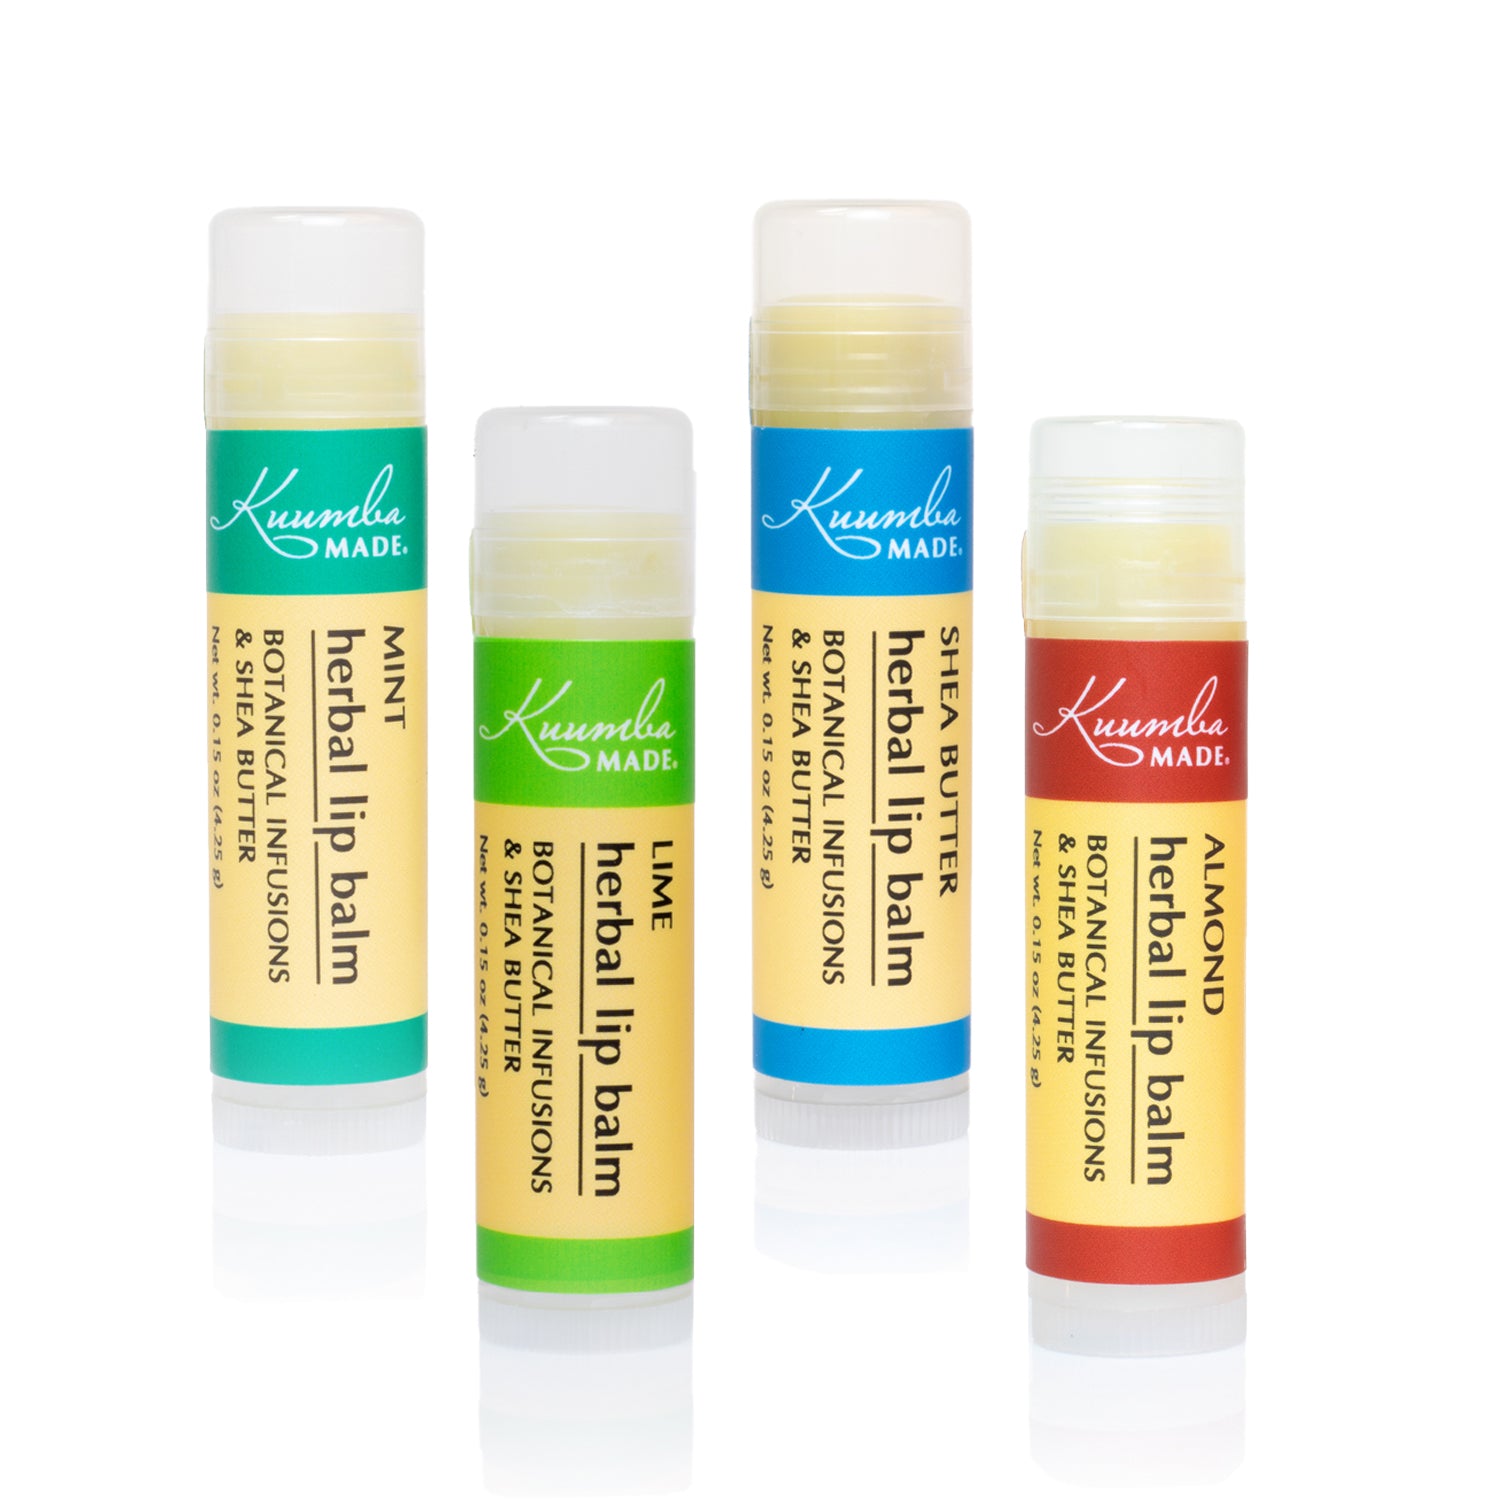 Set of 4 Herbal Lip Balms from Kuumba Made, includes Mint, Lime, Shea Butter, and Almond.